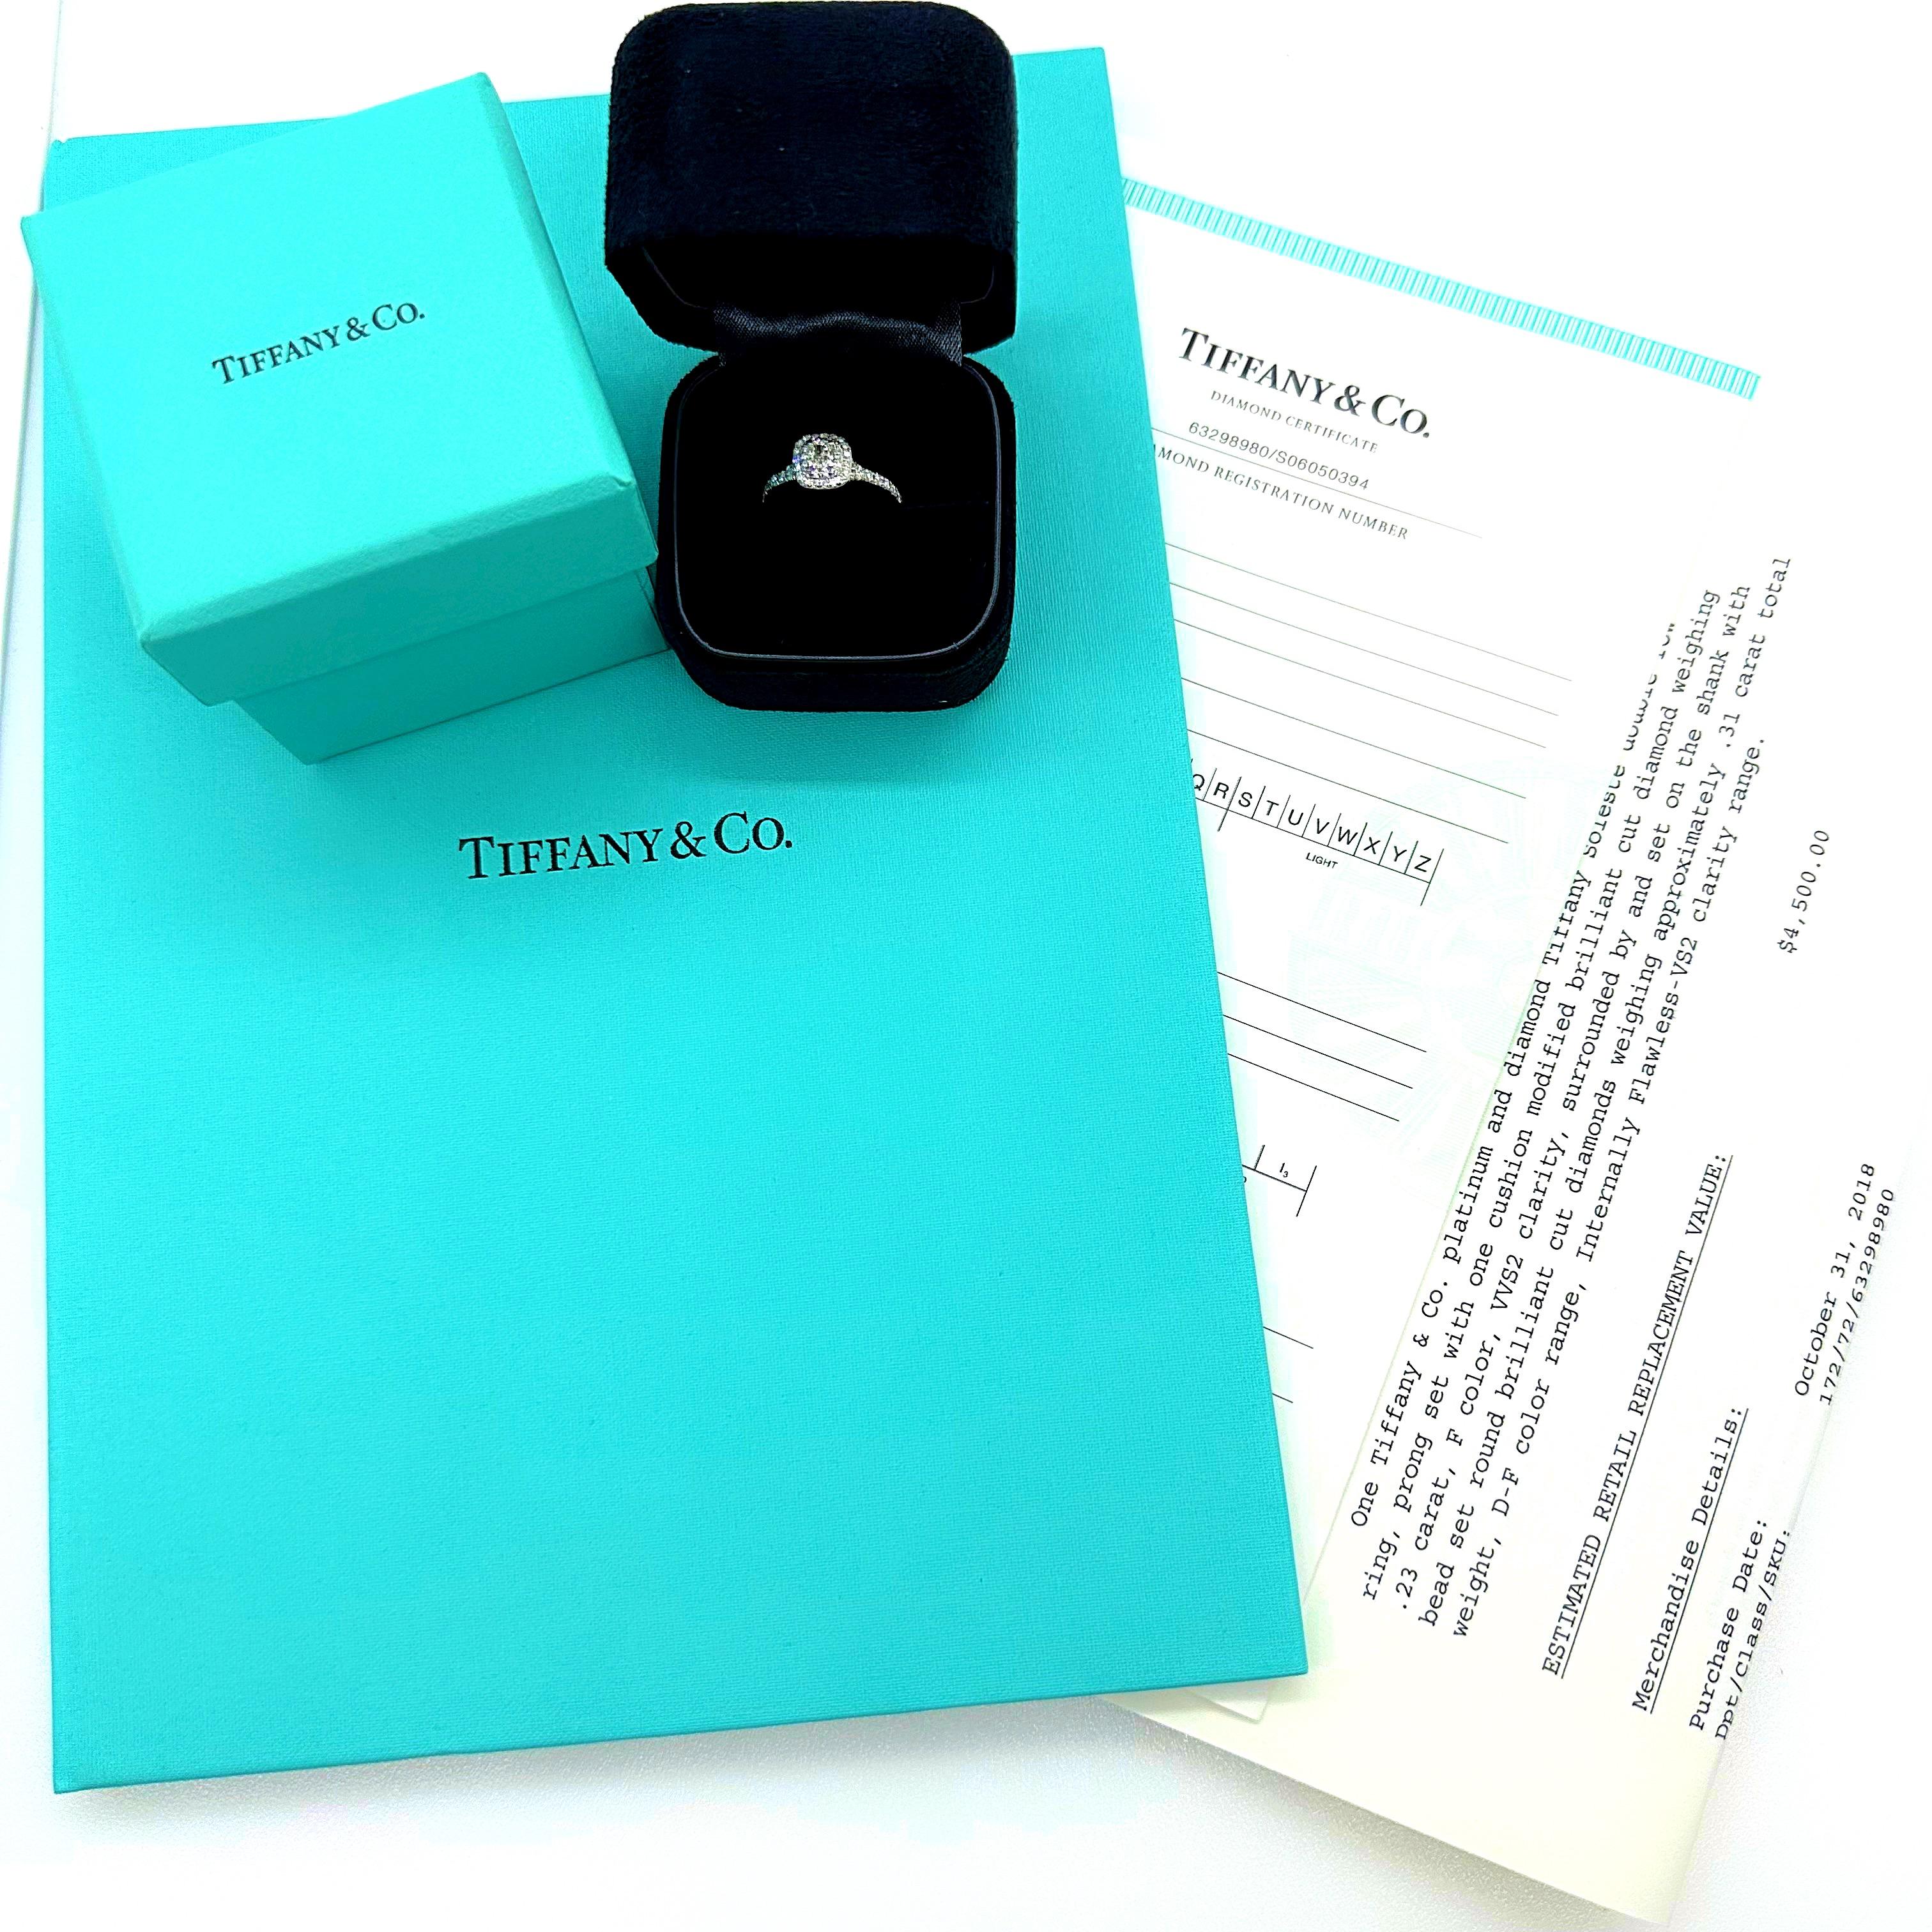 Tiffany & Co Double Row Soleste Diamond Engagement Ring
Style:  Halo with Bead Set Diamond Band
Ref. number:  63298980 / S06050394
Metal:   Platinum Pt950
Size / Measurements:  5 sizable / 2 mm 
TCW:  0.54 tcw
Main Diamond:  Cushion Brilliant 0.23